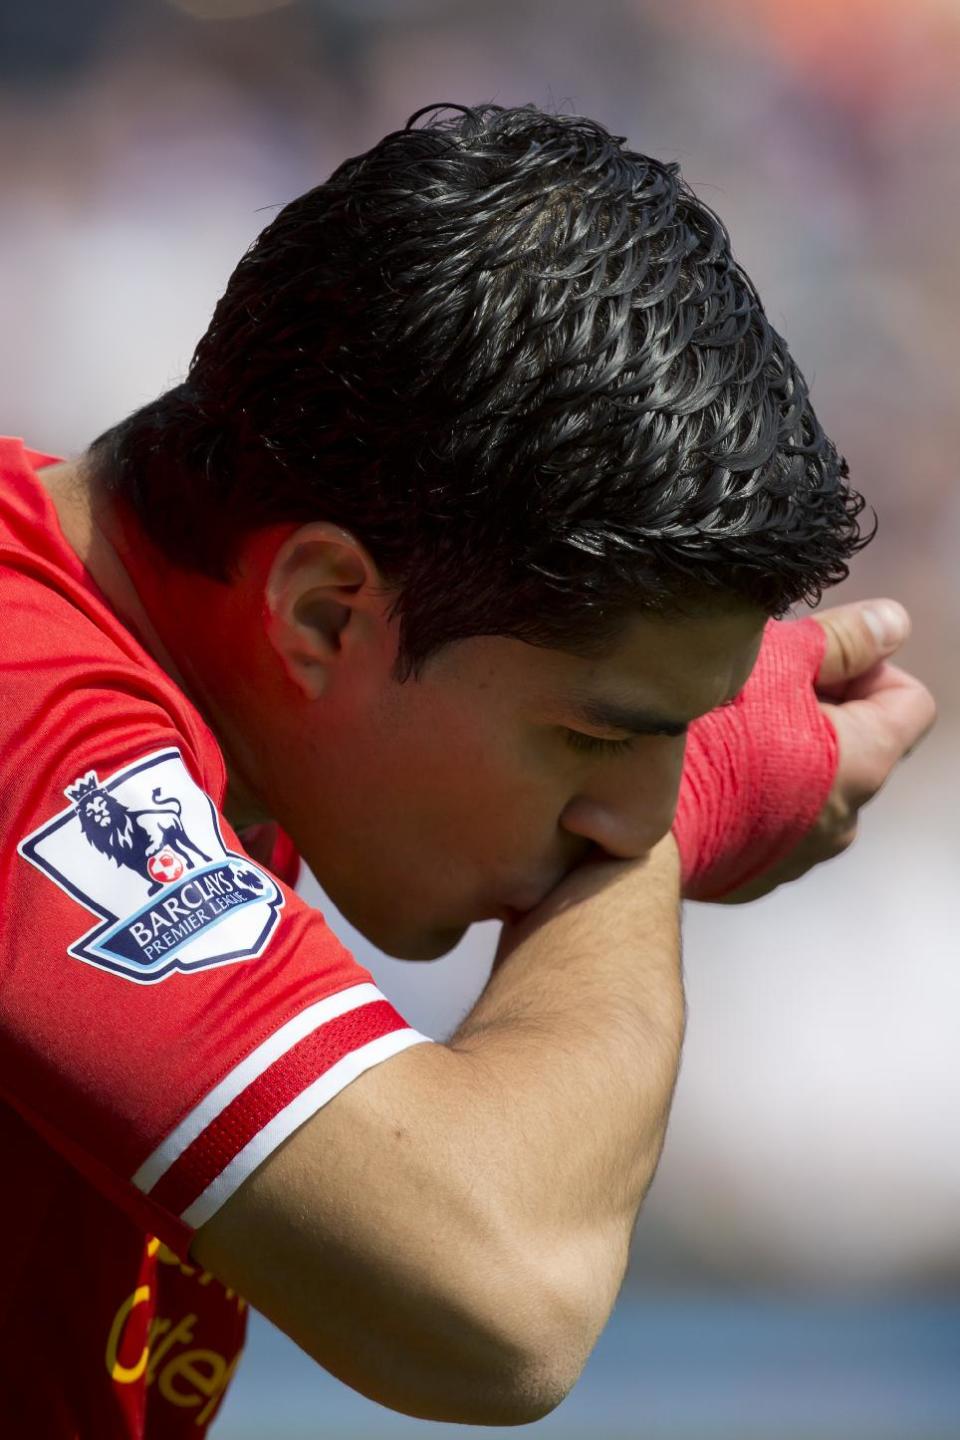 Liverpool's Luis Suarez kisses his wrist as he takes to the pitch for his team's English Premier League soccer match against Chelsea at Anfield Stadium, Liverpool, England, Sunday April 27, 2014. (AP Photo/Jon Super)